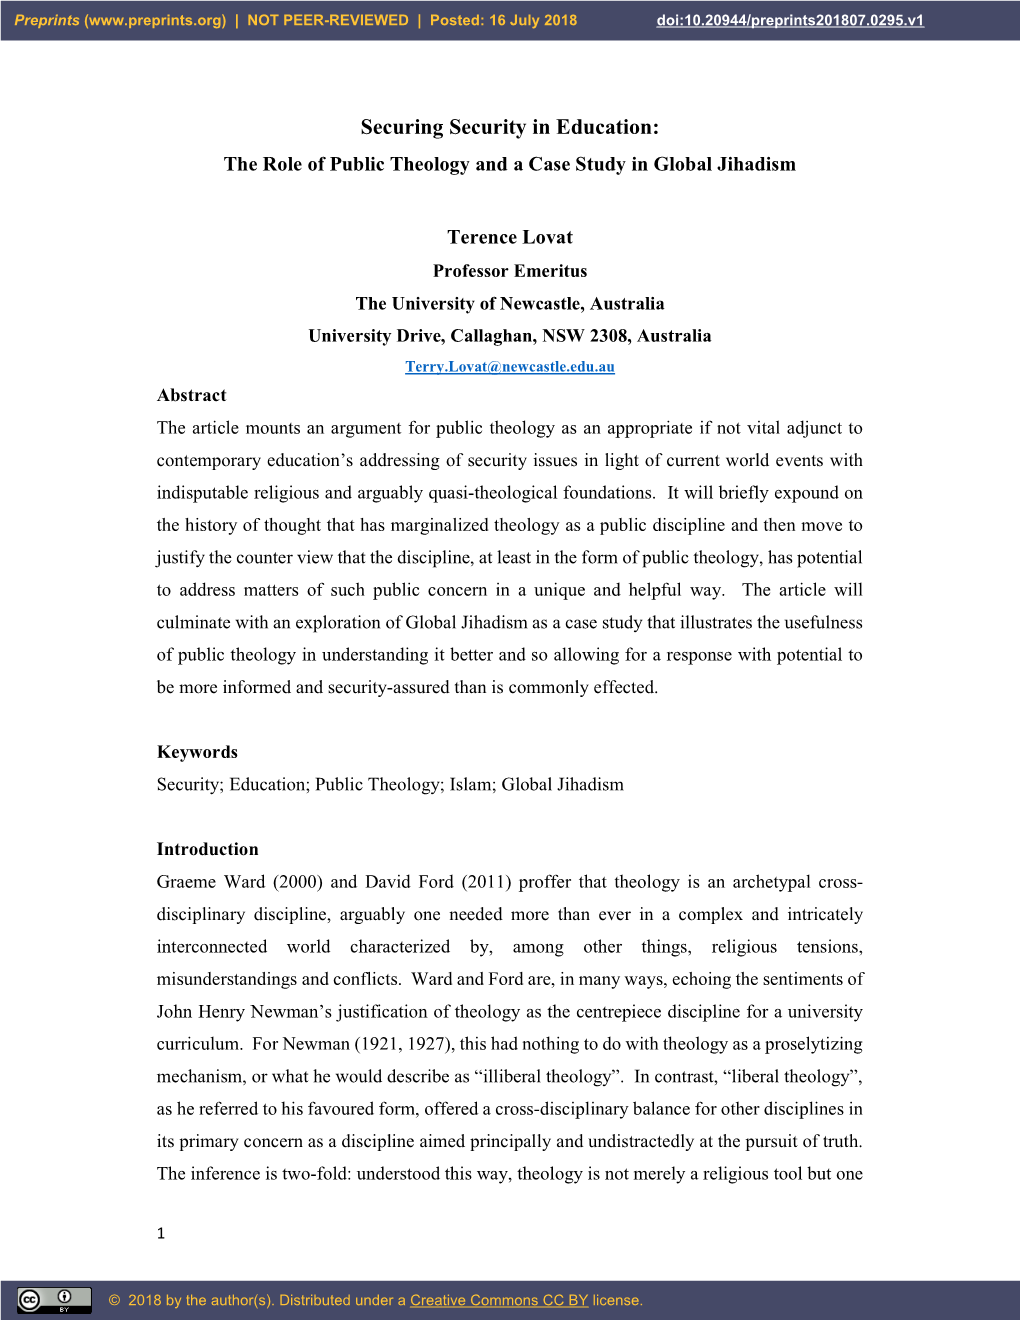 Securing Security in Education: the Role of Public Theology and a Case Study in Global Jihadism